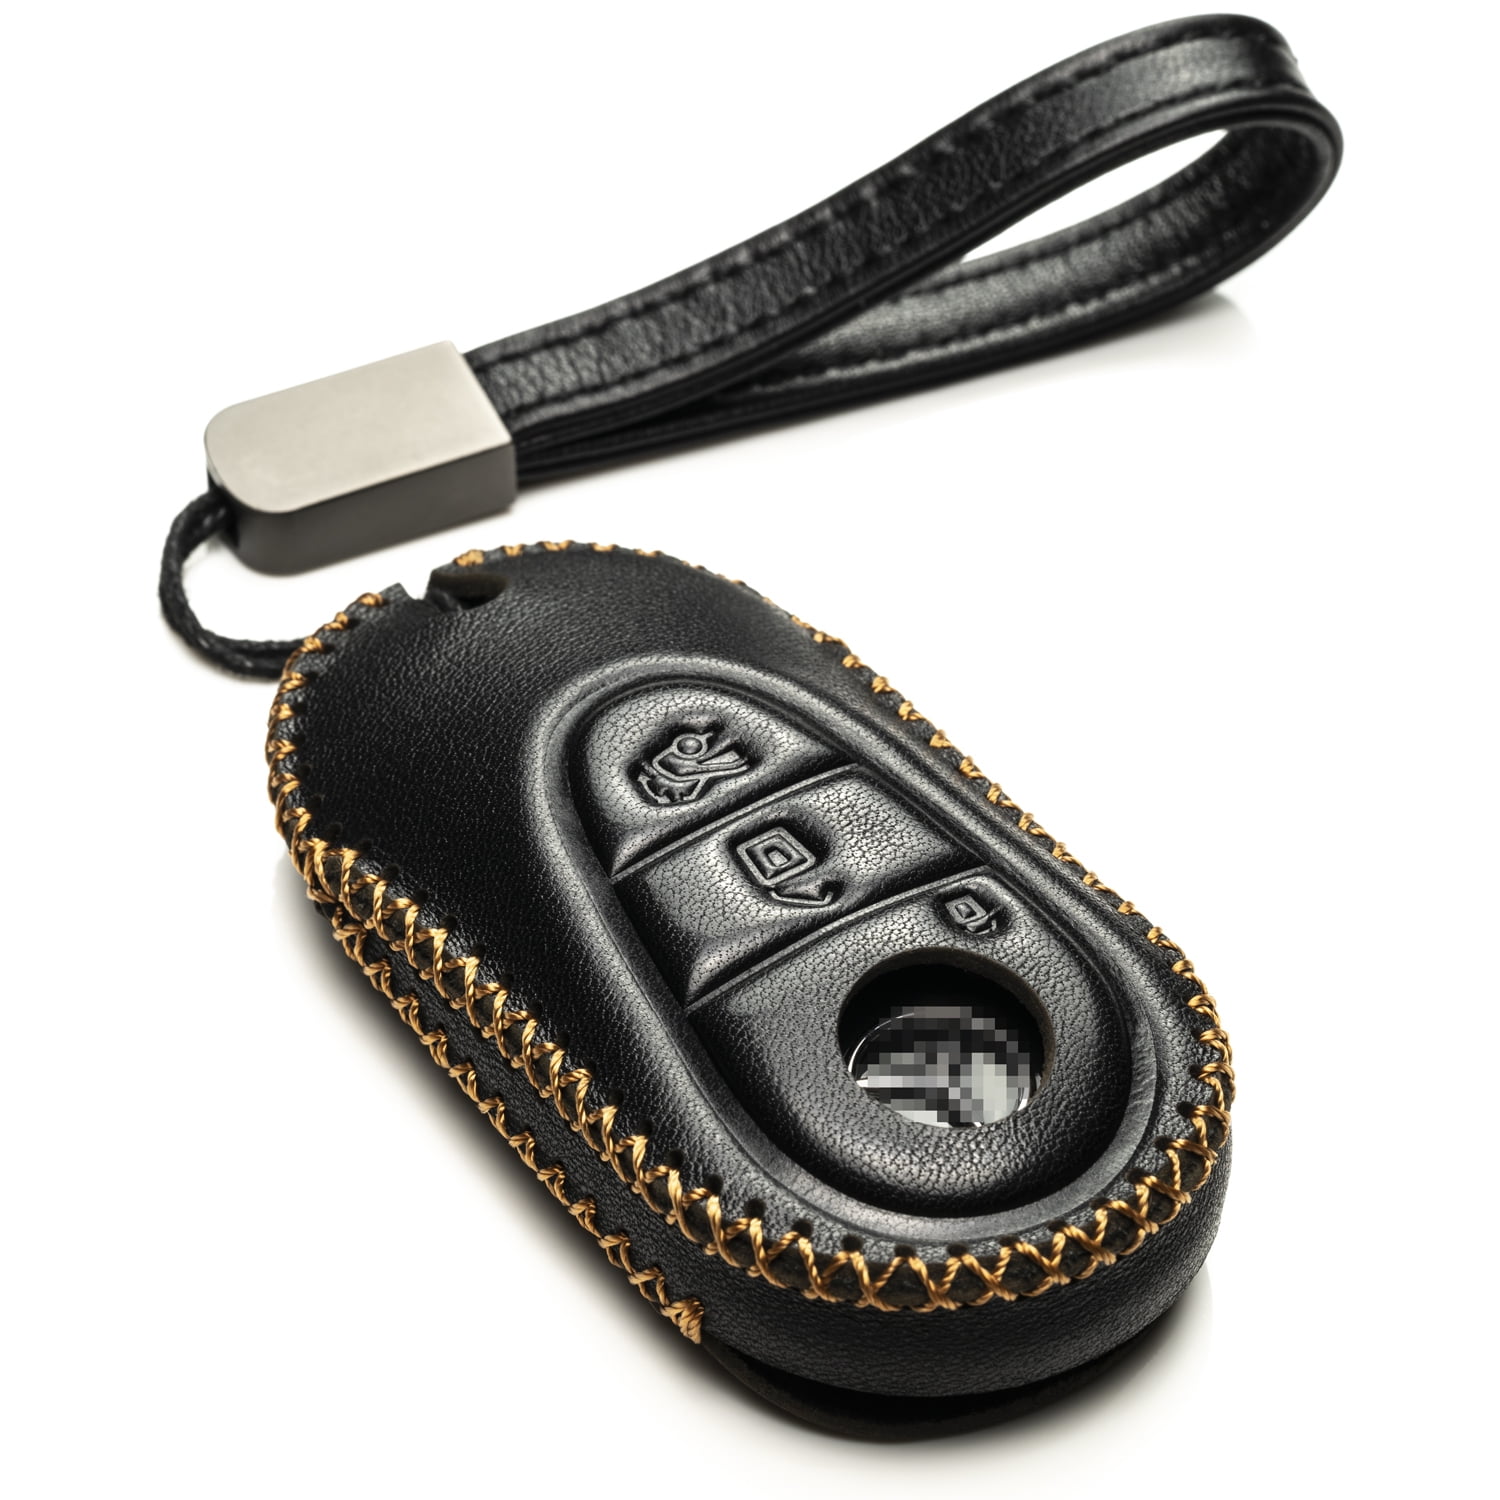 Vitodeco Genuine Leather Smart Key Fob Case Cover Protector